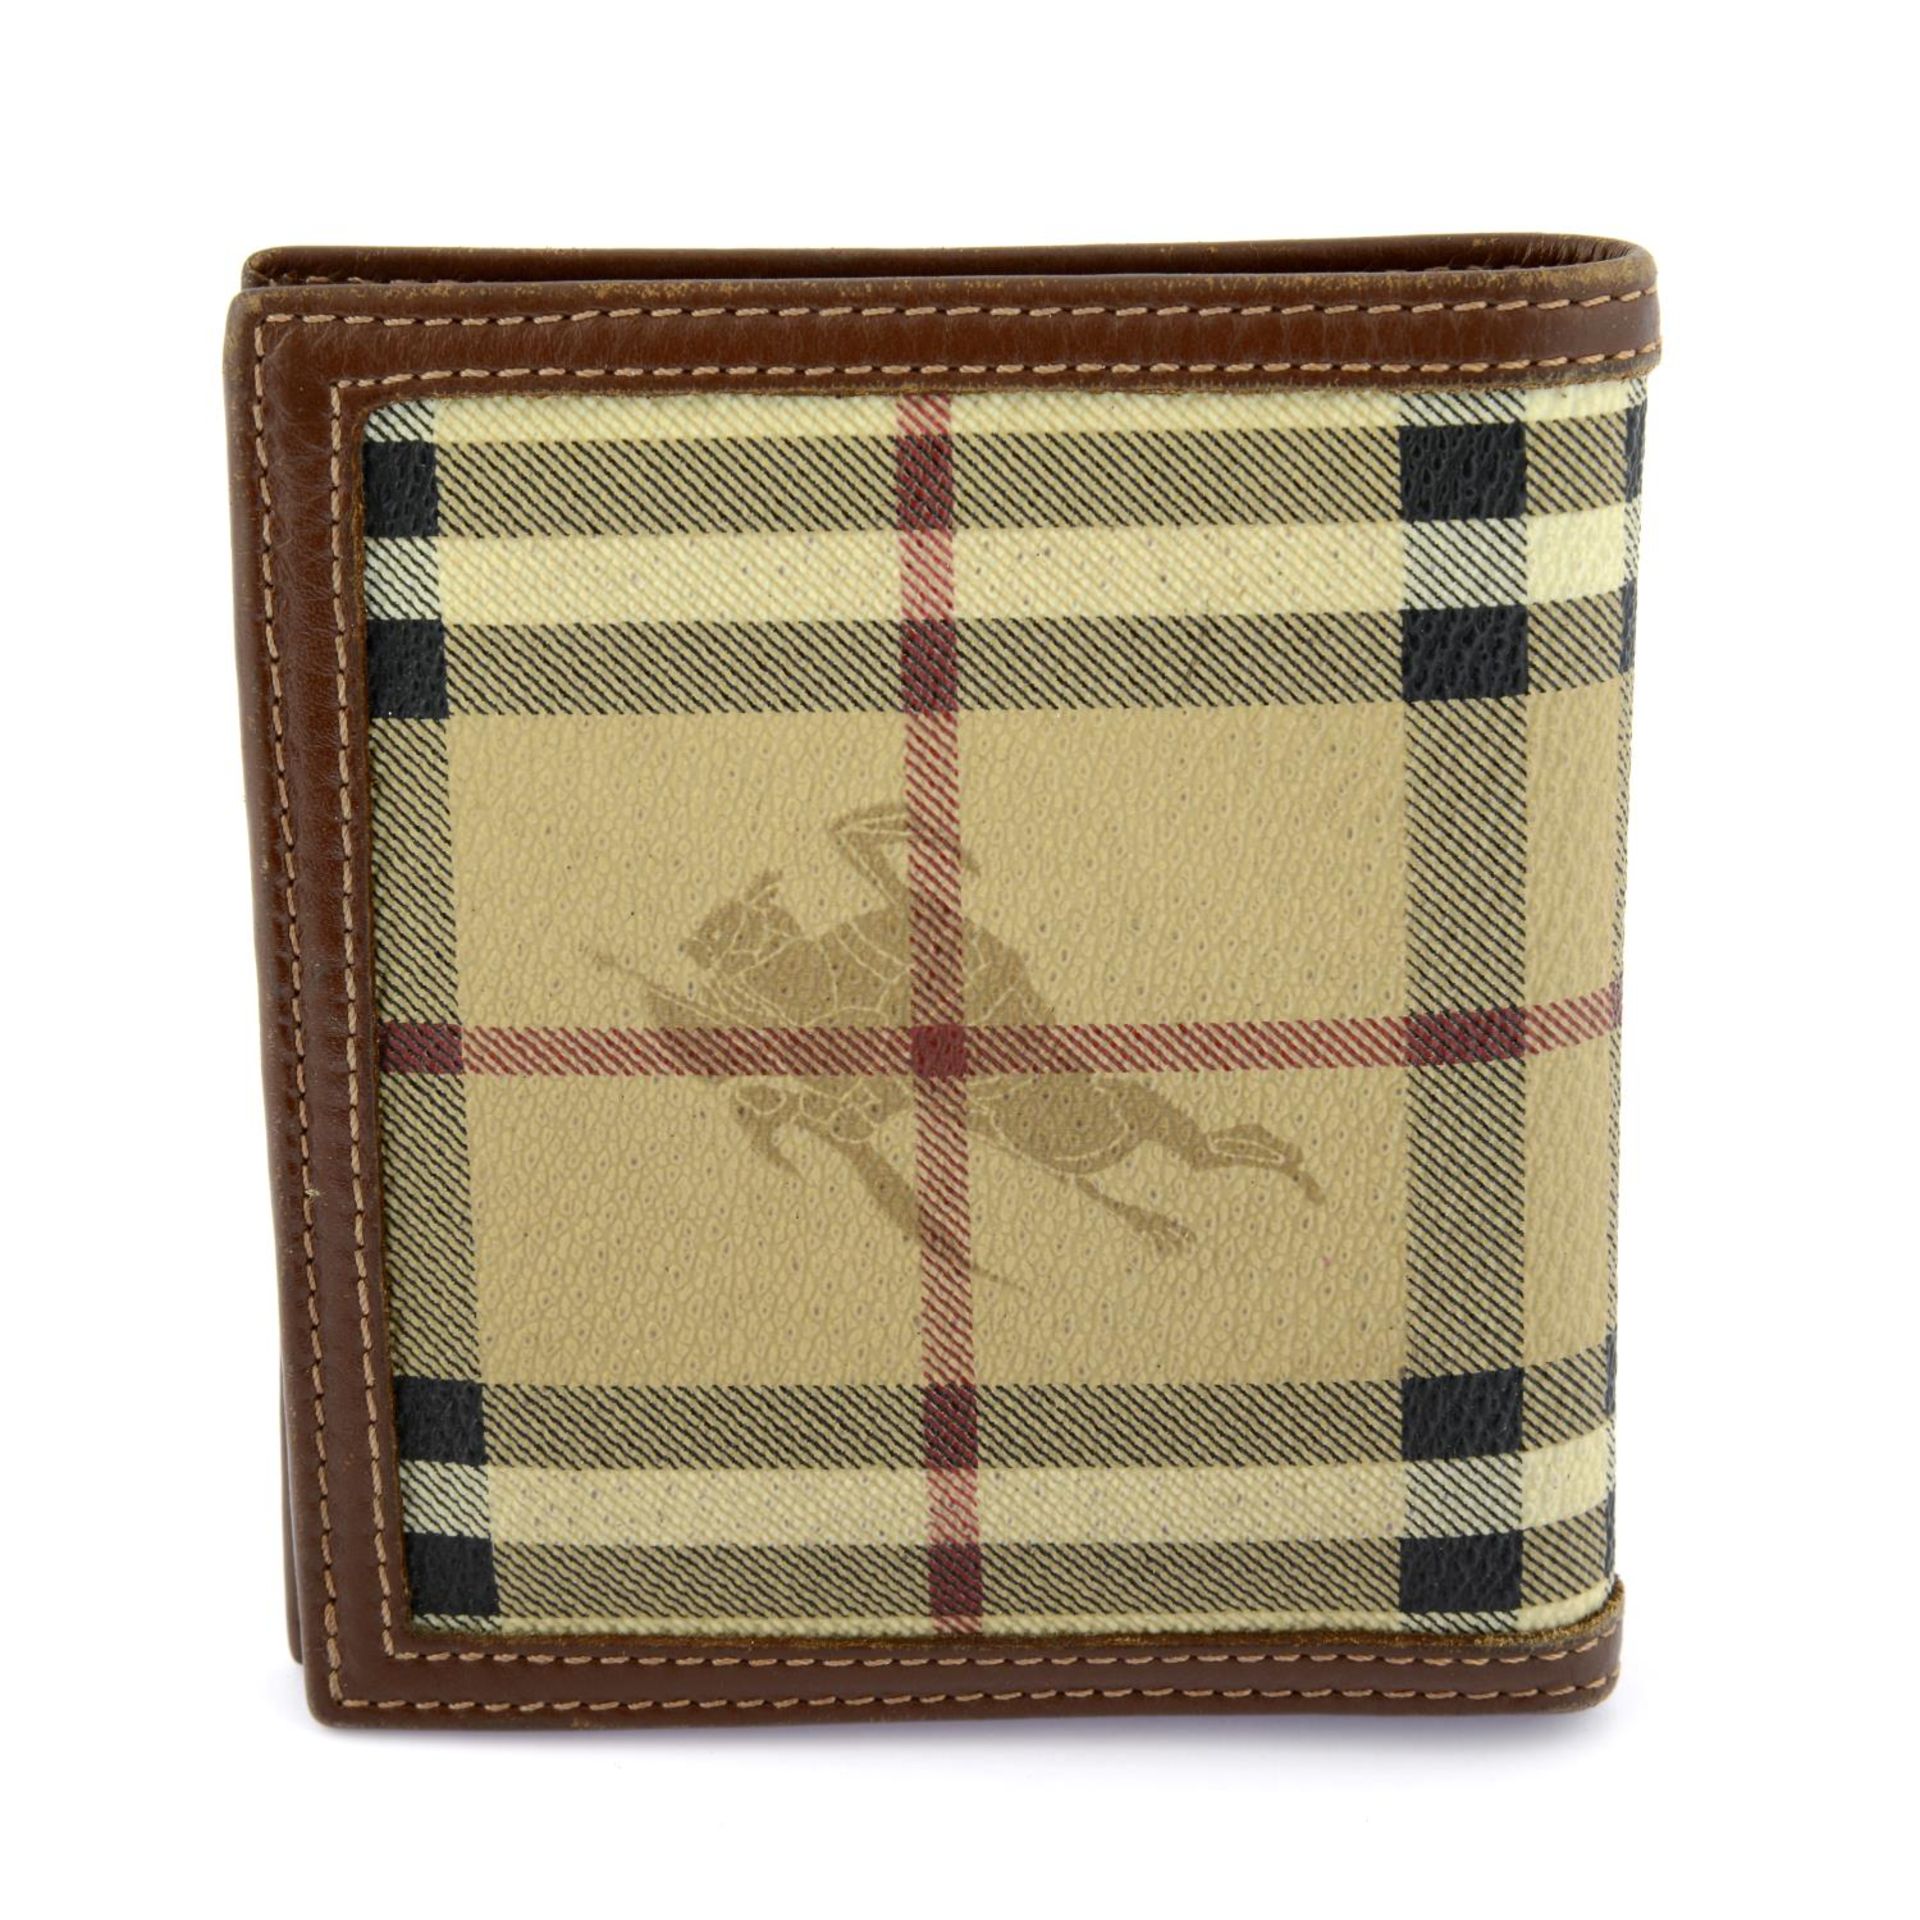 BURBERRY - a Haymarket Check wallet. - Image 2 of 4